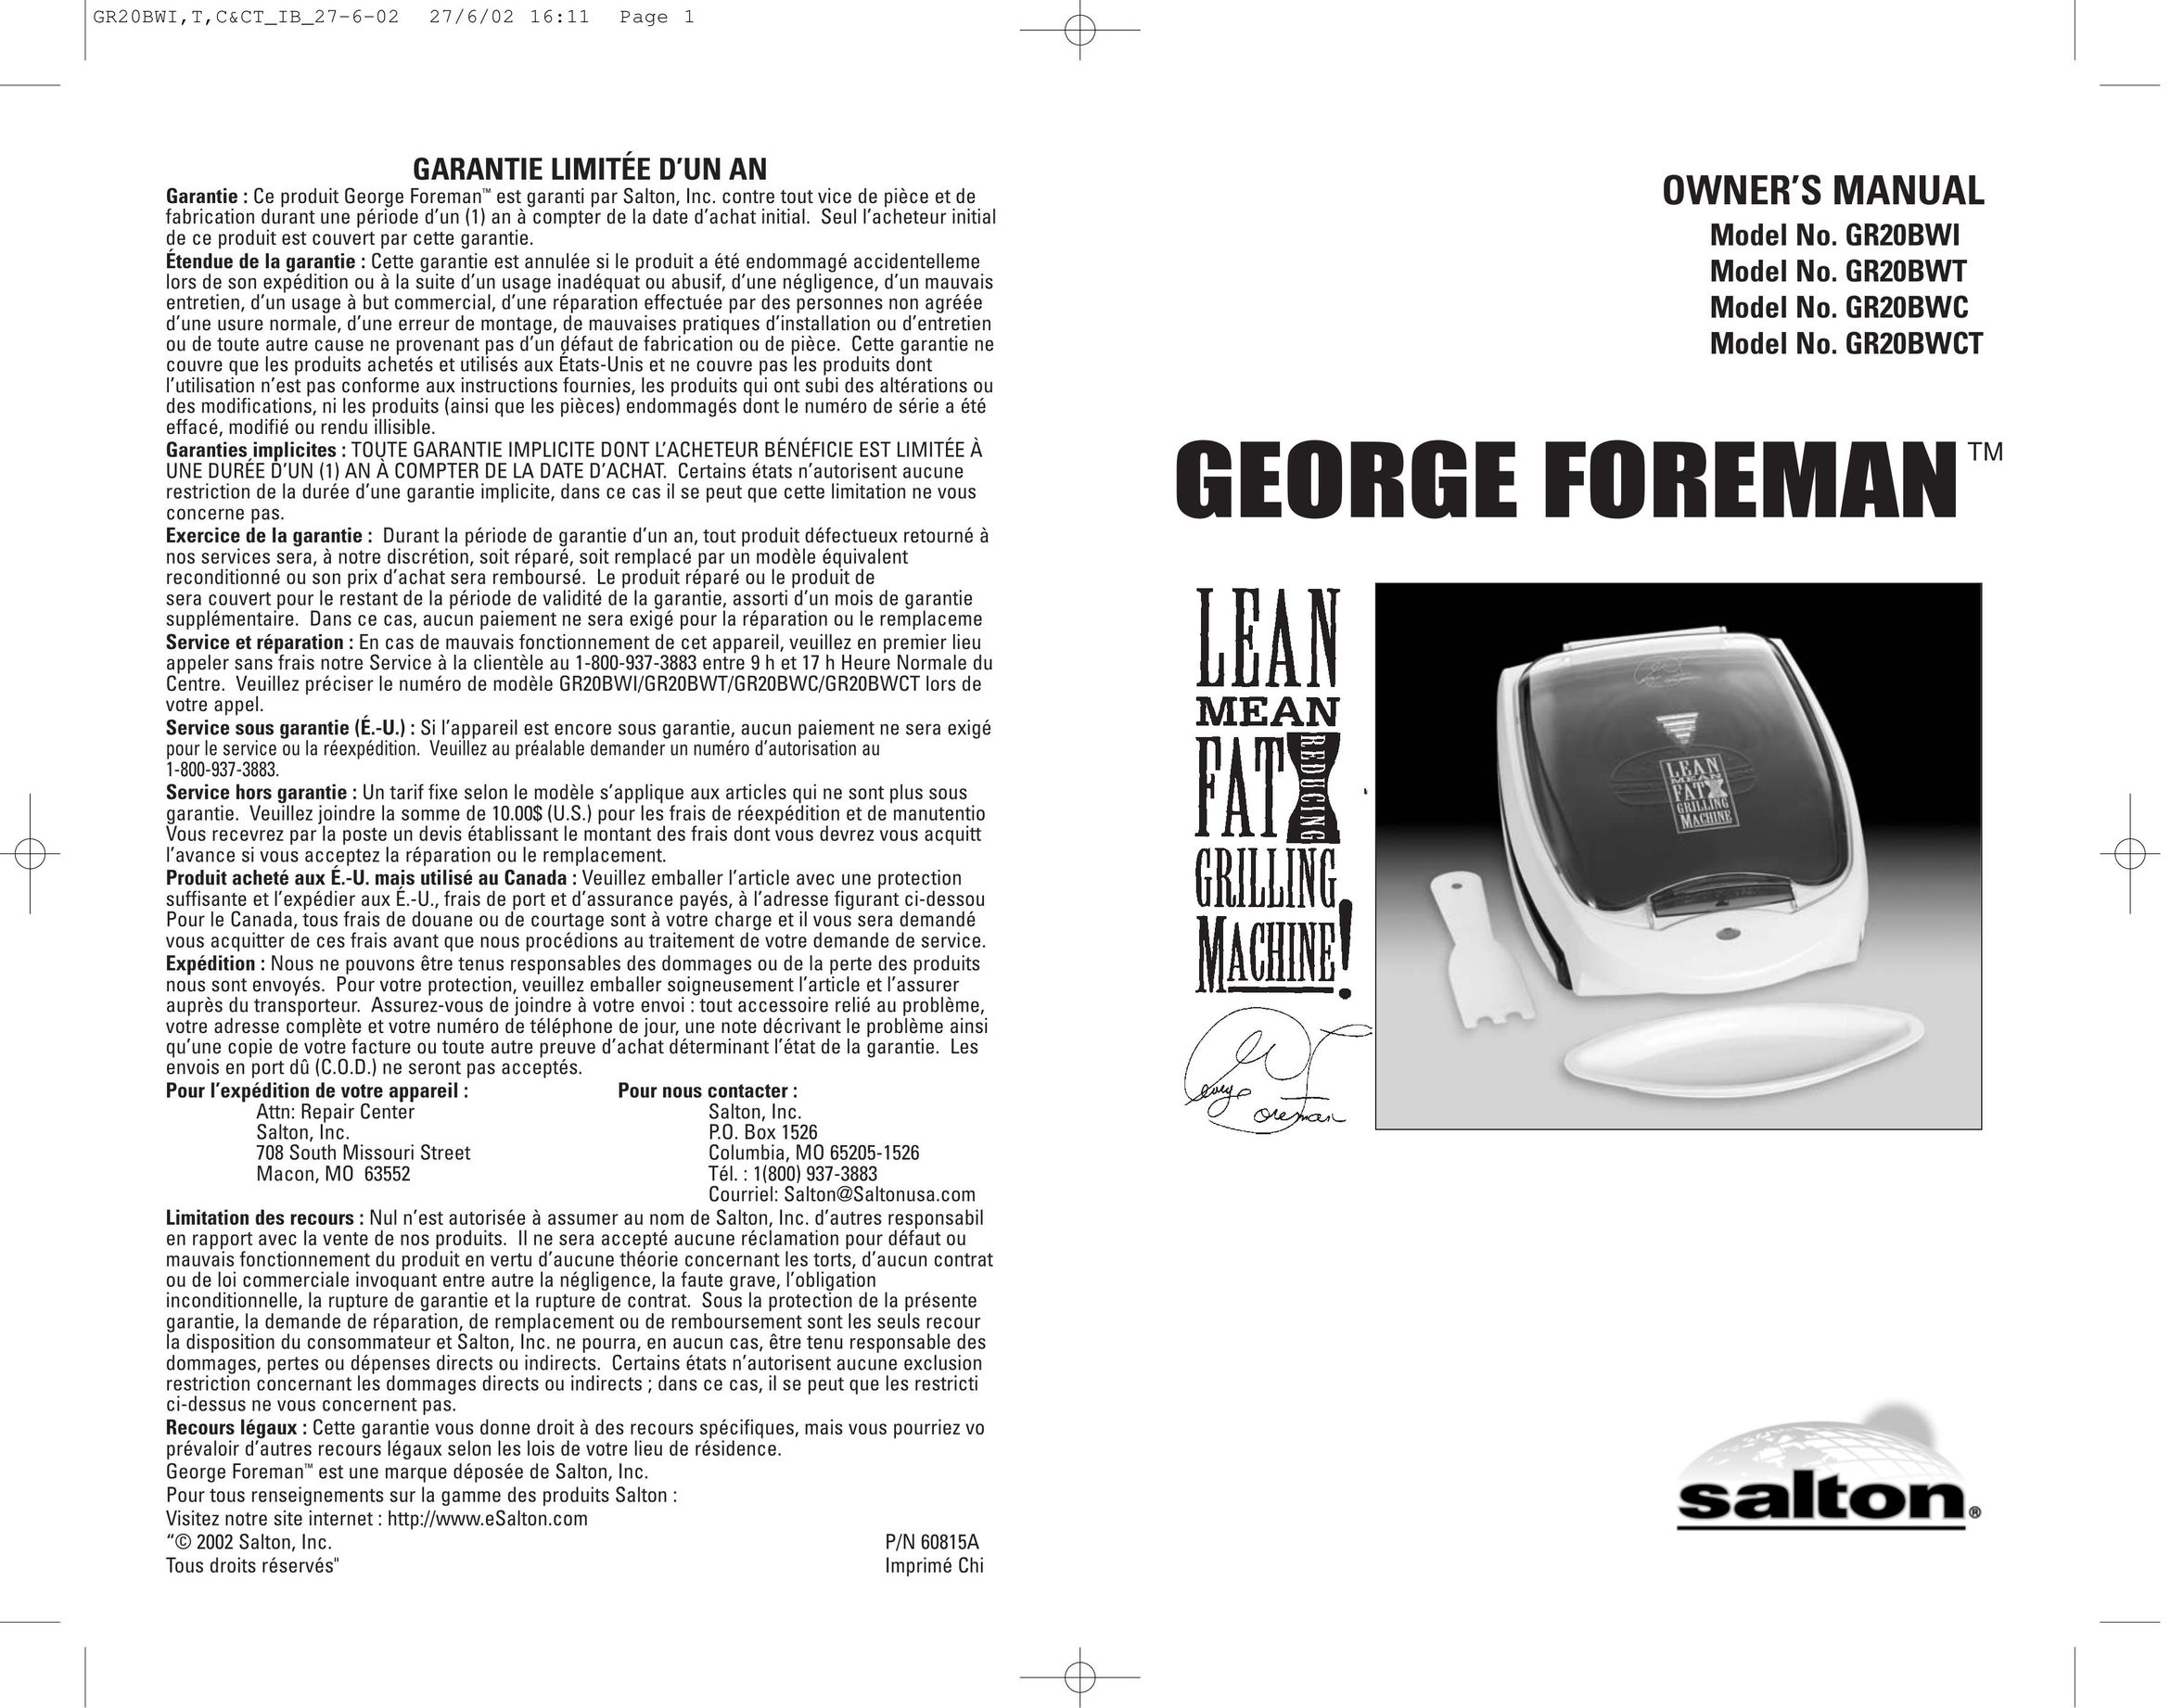 George Foreman GR20BWC Kitchen Grill User Manual